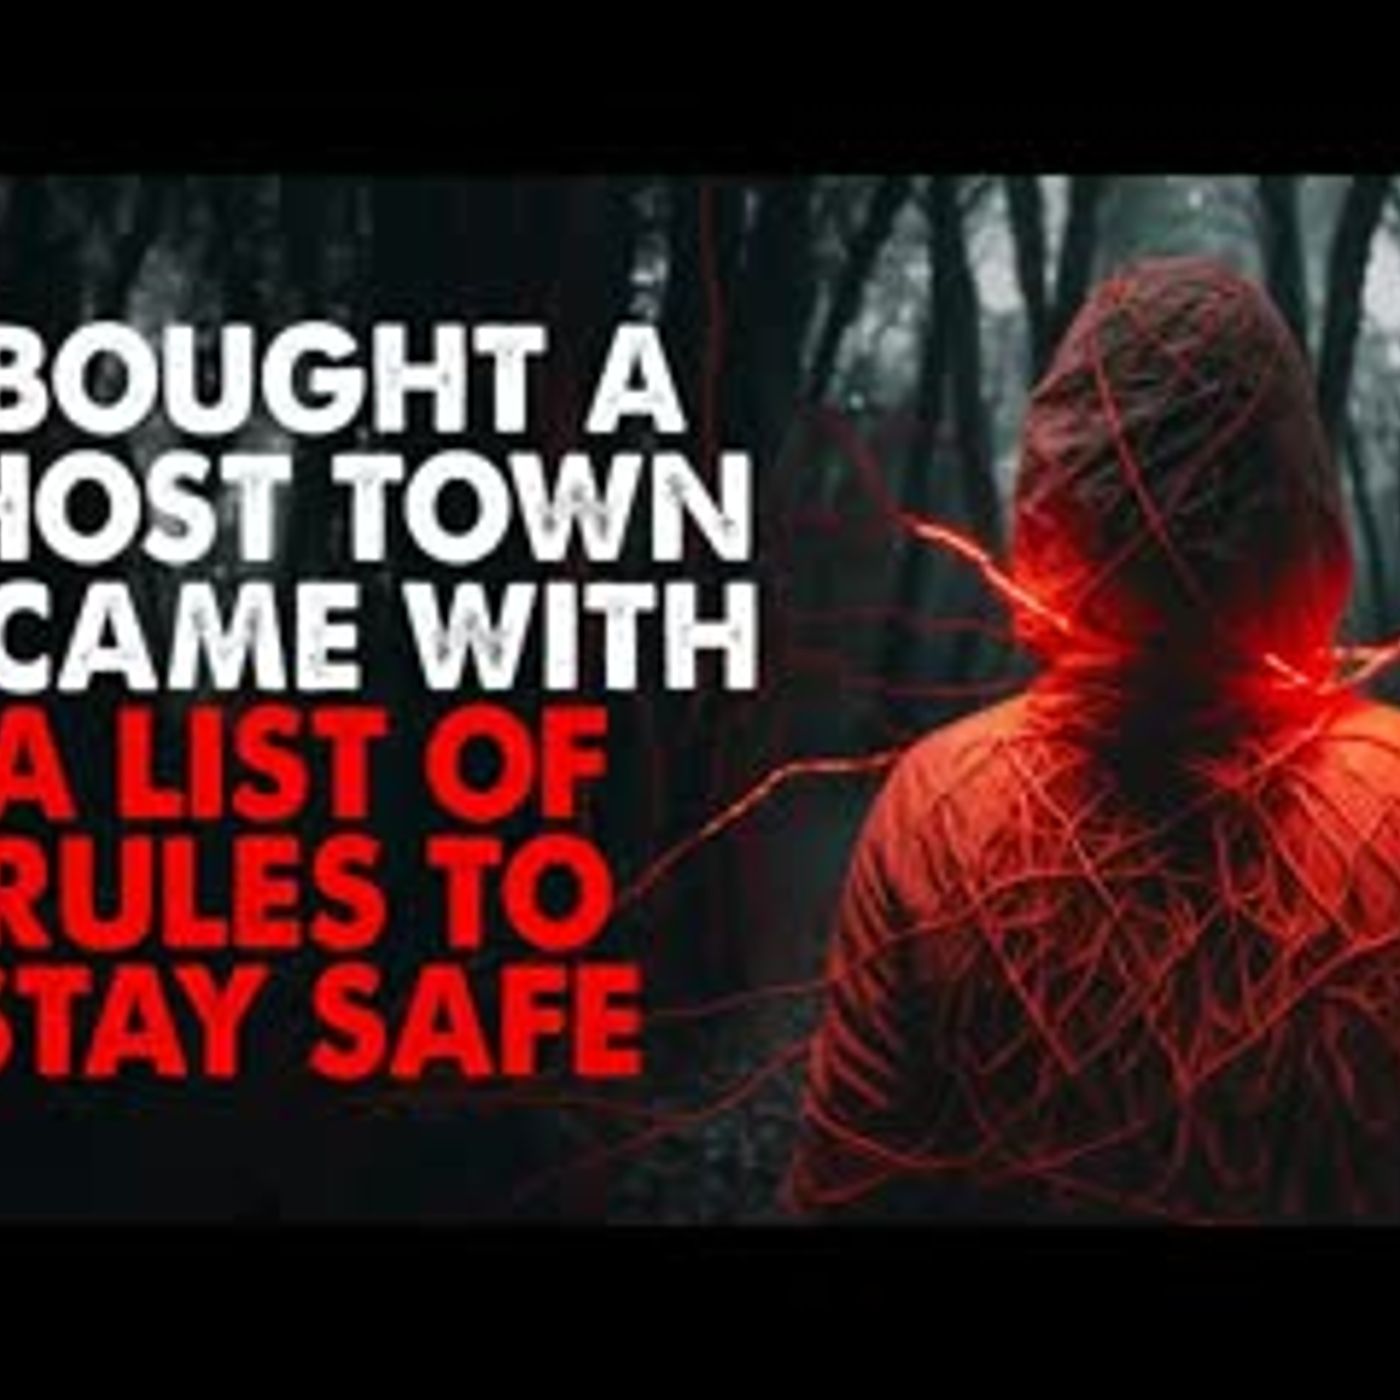 "I bought a ghost town. It came with a list of rules to stay safe" Creepypasta